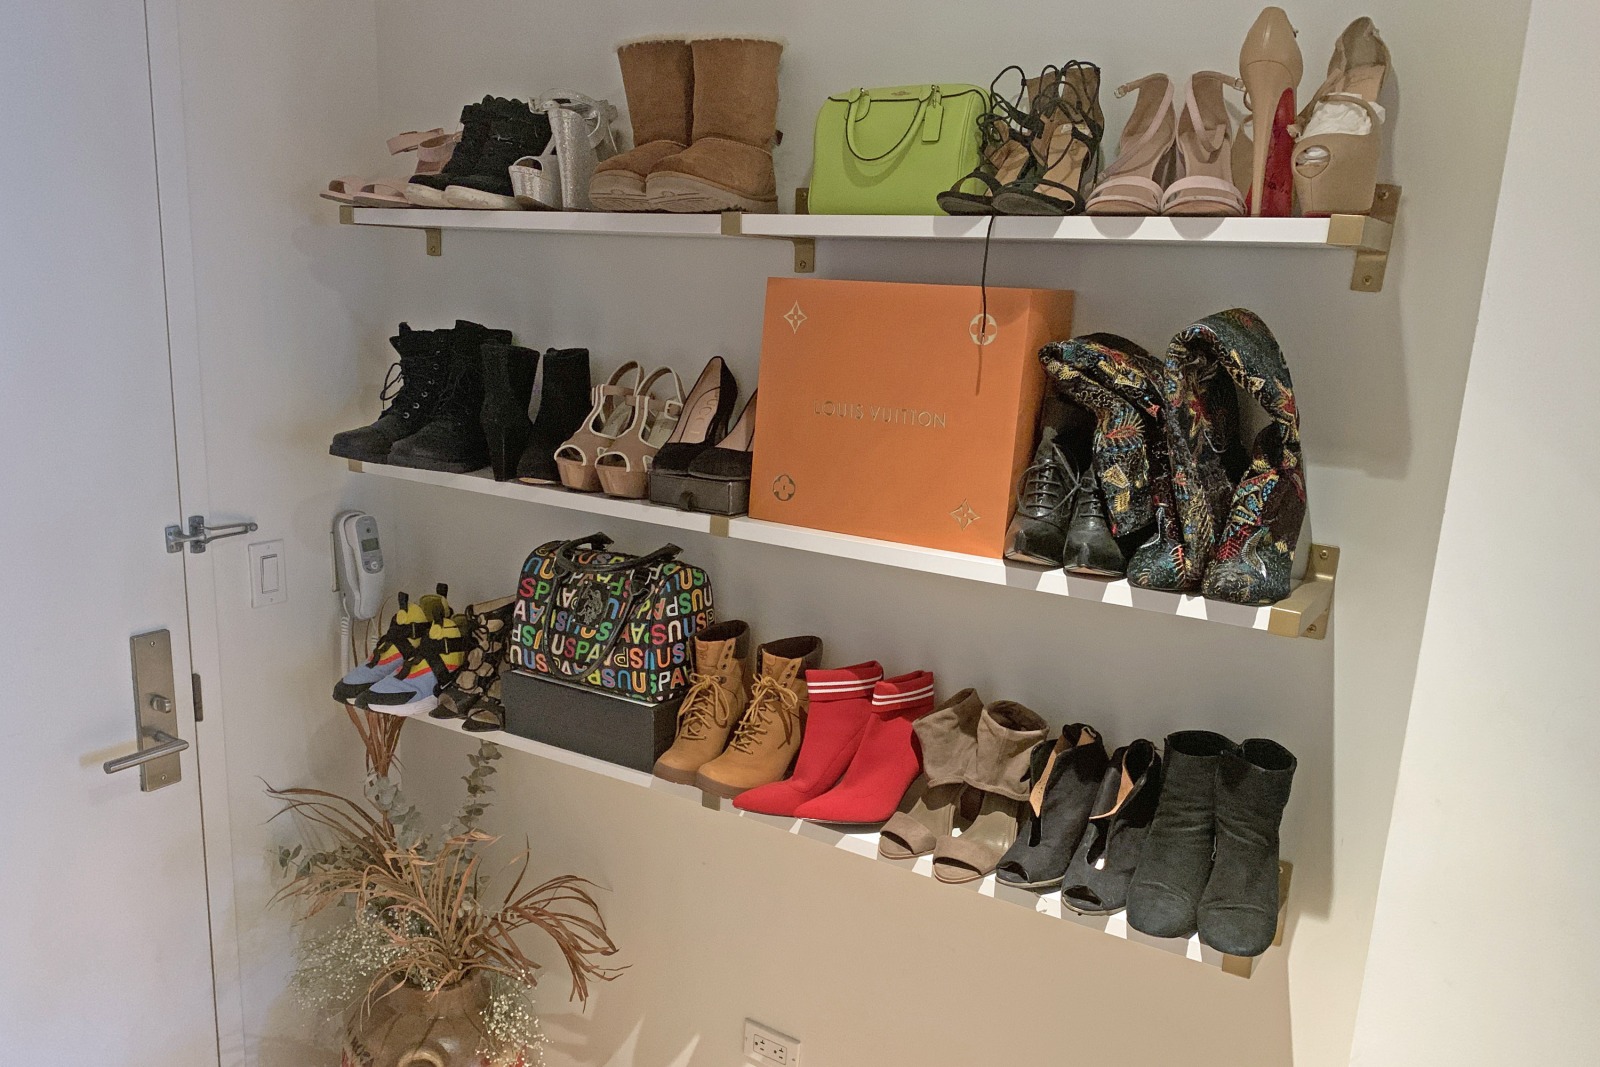 https://wp-tid.zillowstatic.com/streeteasy/2/Foyer-Shoe-storage-small-spaces_edited-2-512e0d.jpg